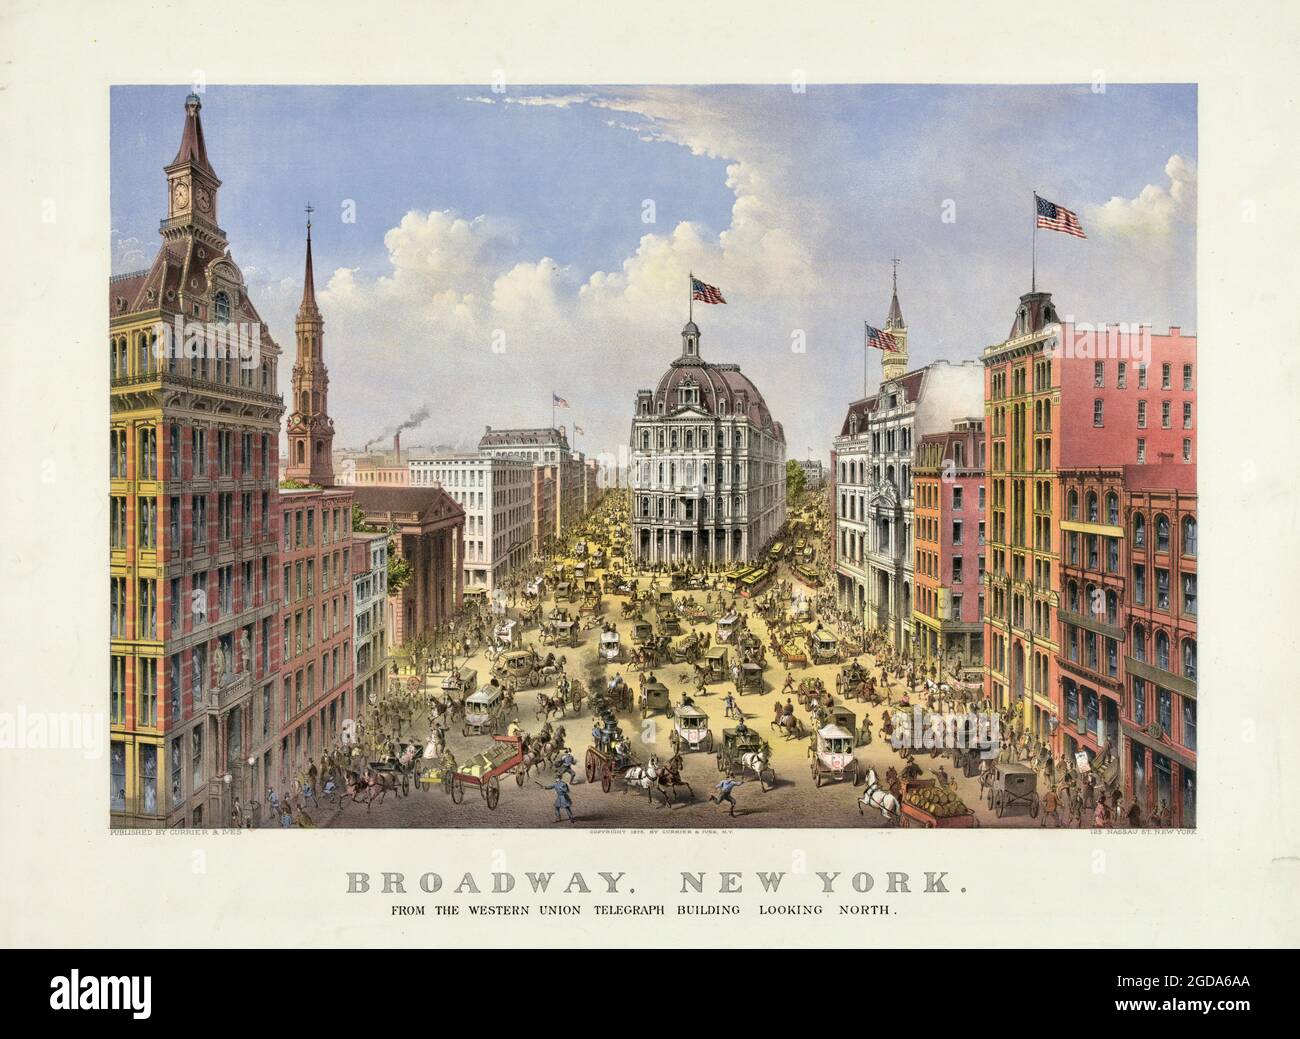 Broadway, New York- From the western union telegraph building looking north - Currier & Ives - 1875 Stock Photo